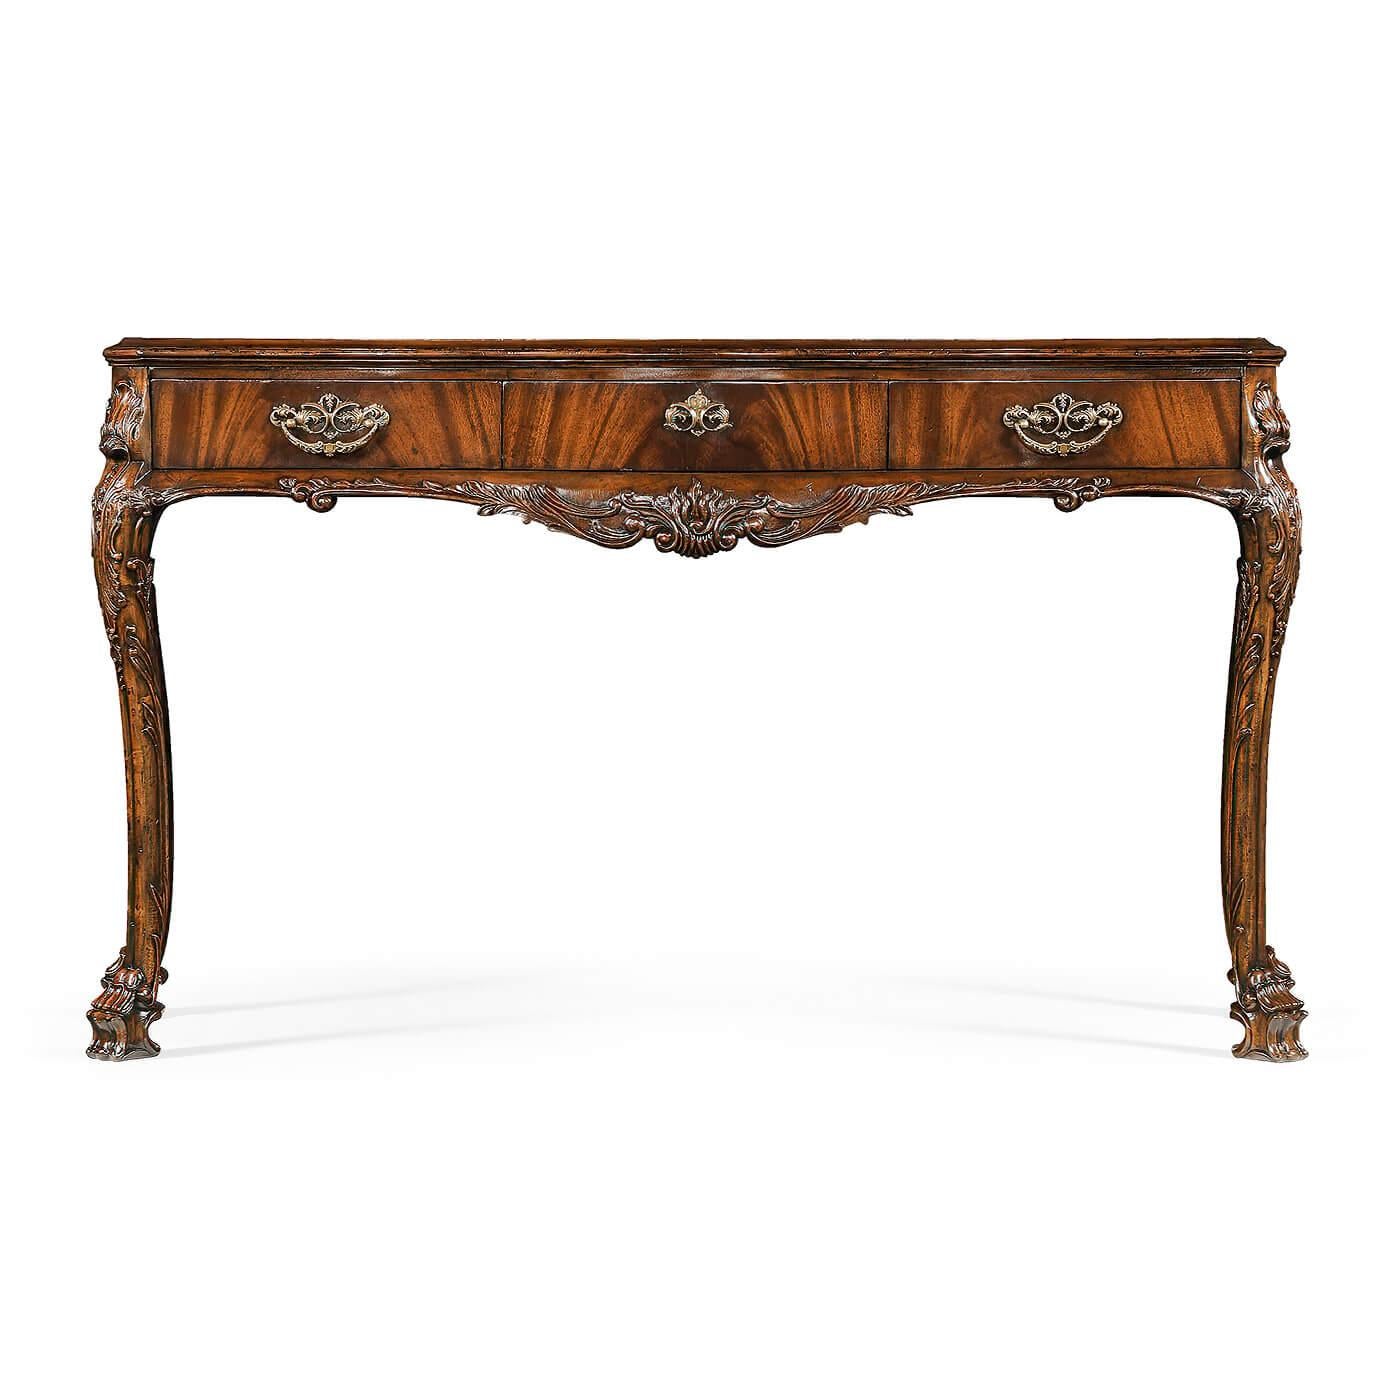 An Irish George II style mahogany veneered rococo style console table with fine shallow carved floral details to legs, oak secondary woods and a single long drawer standing on four cabriole legs with carved and stylized lions paw feet.